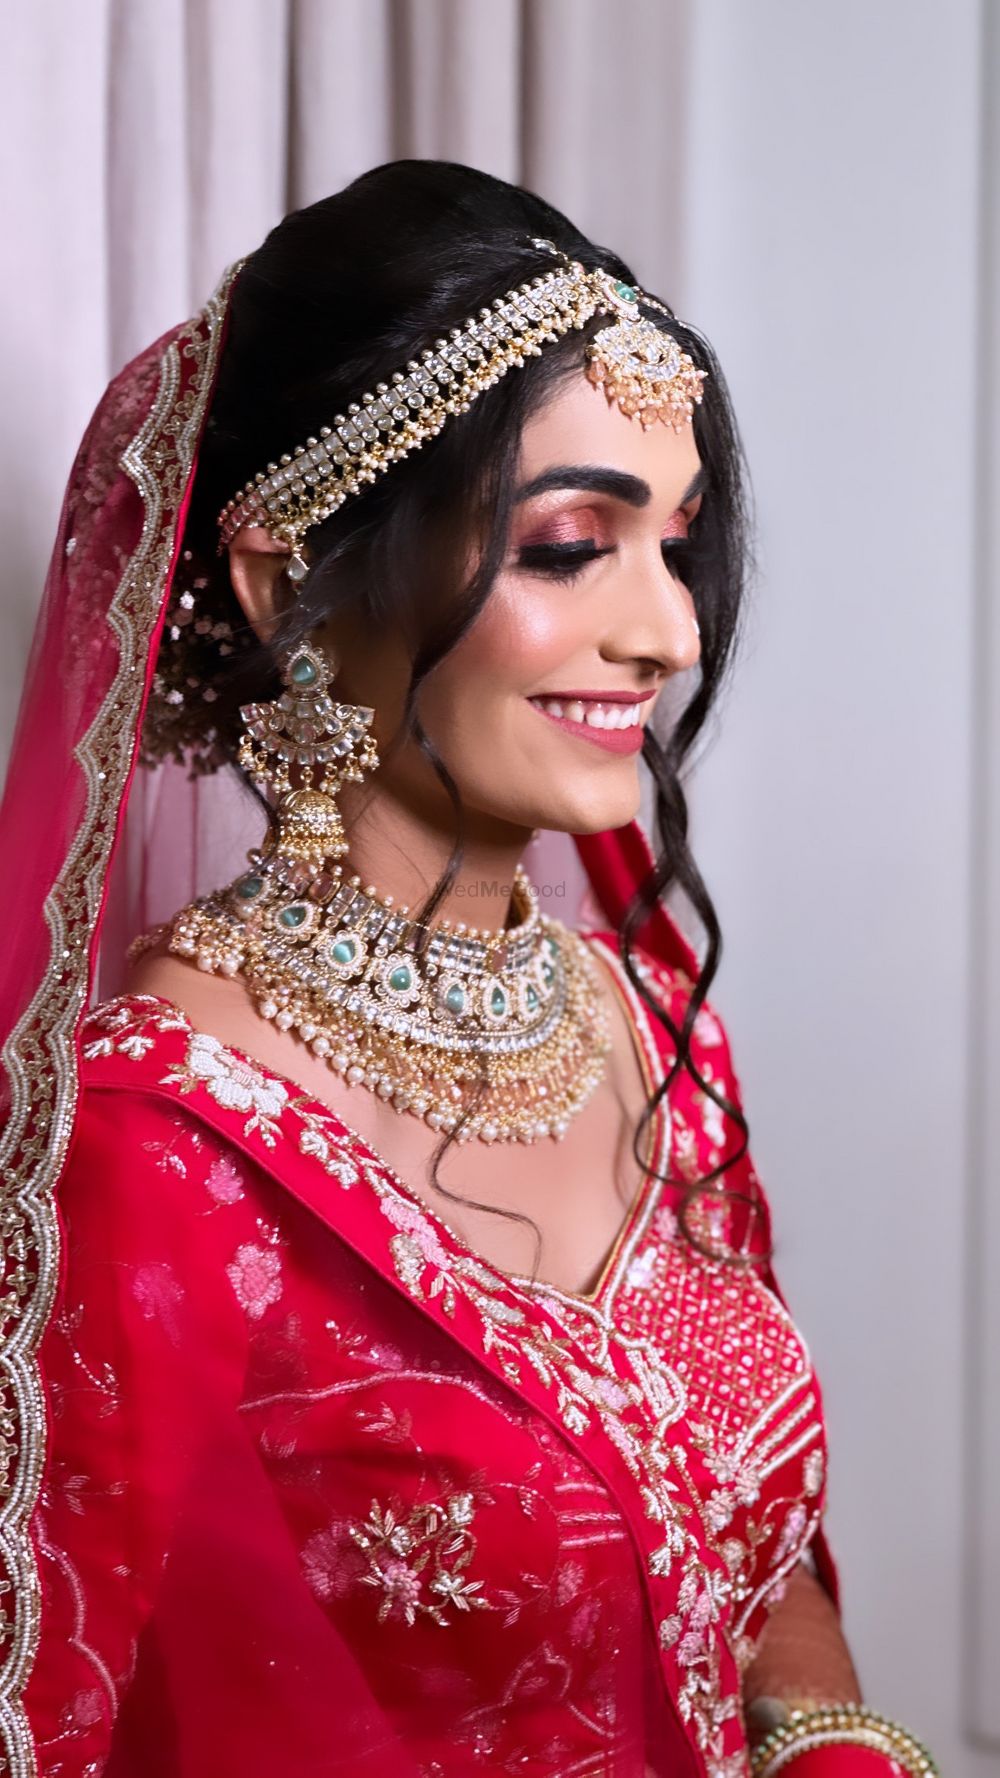 Photo From Brides - By Zeba Khan's The Face Studio